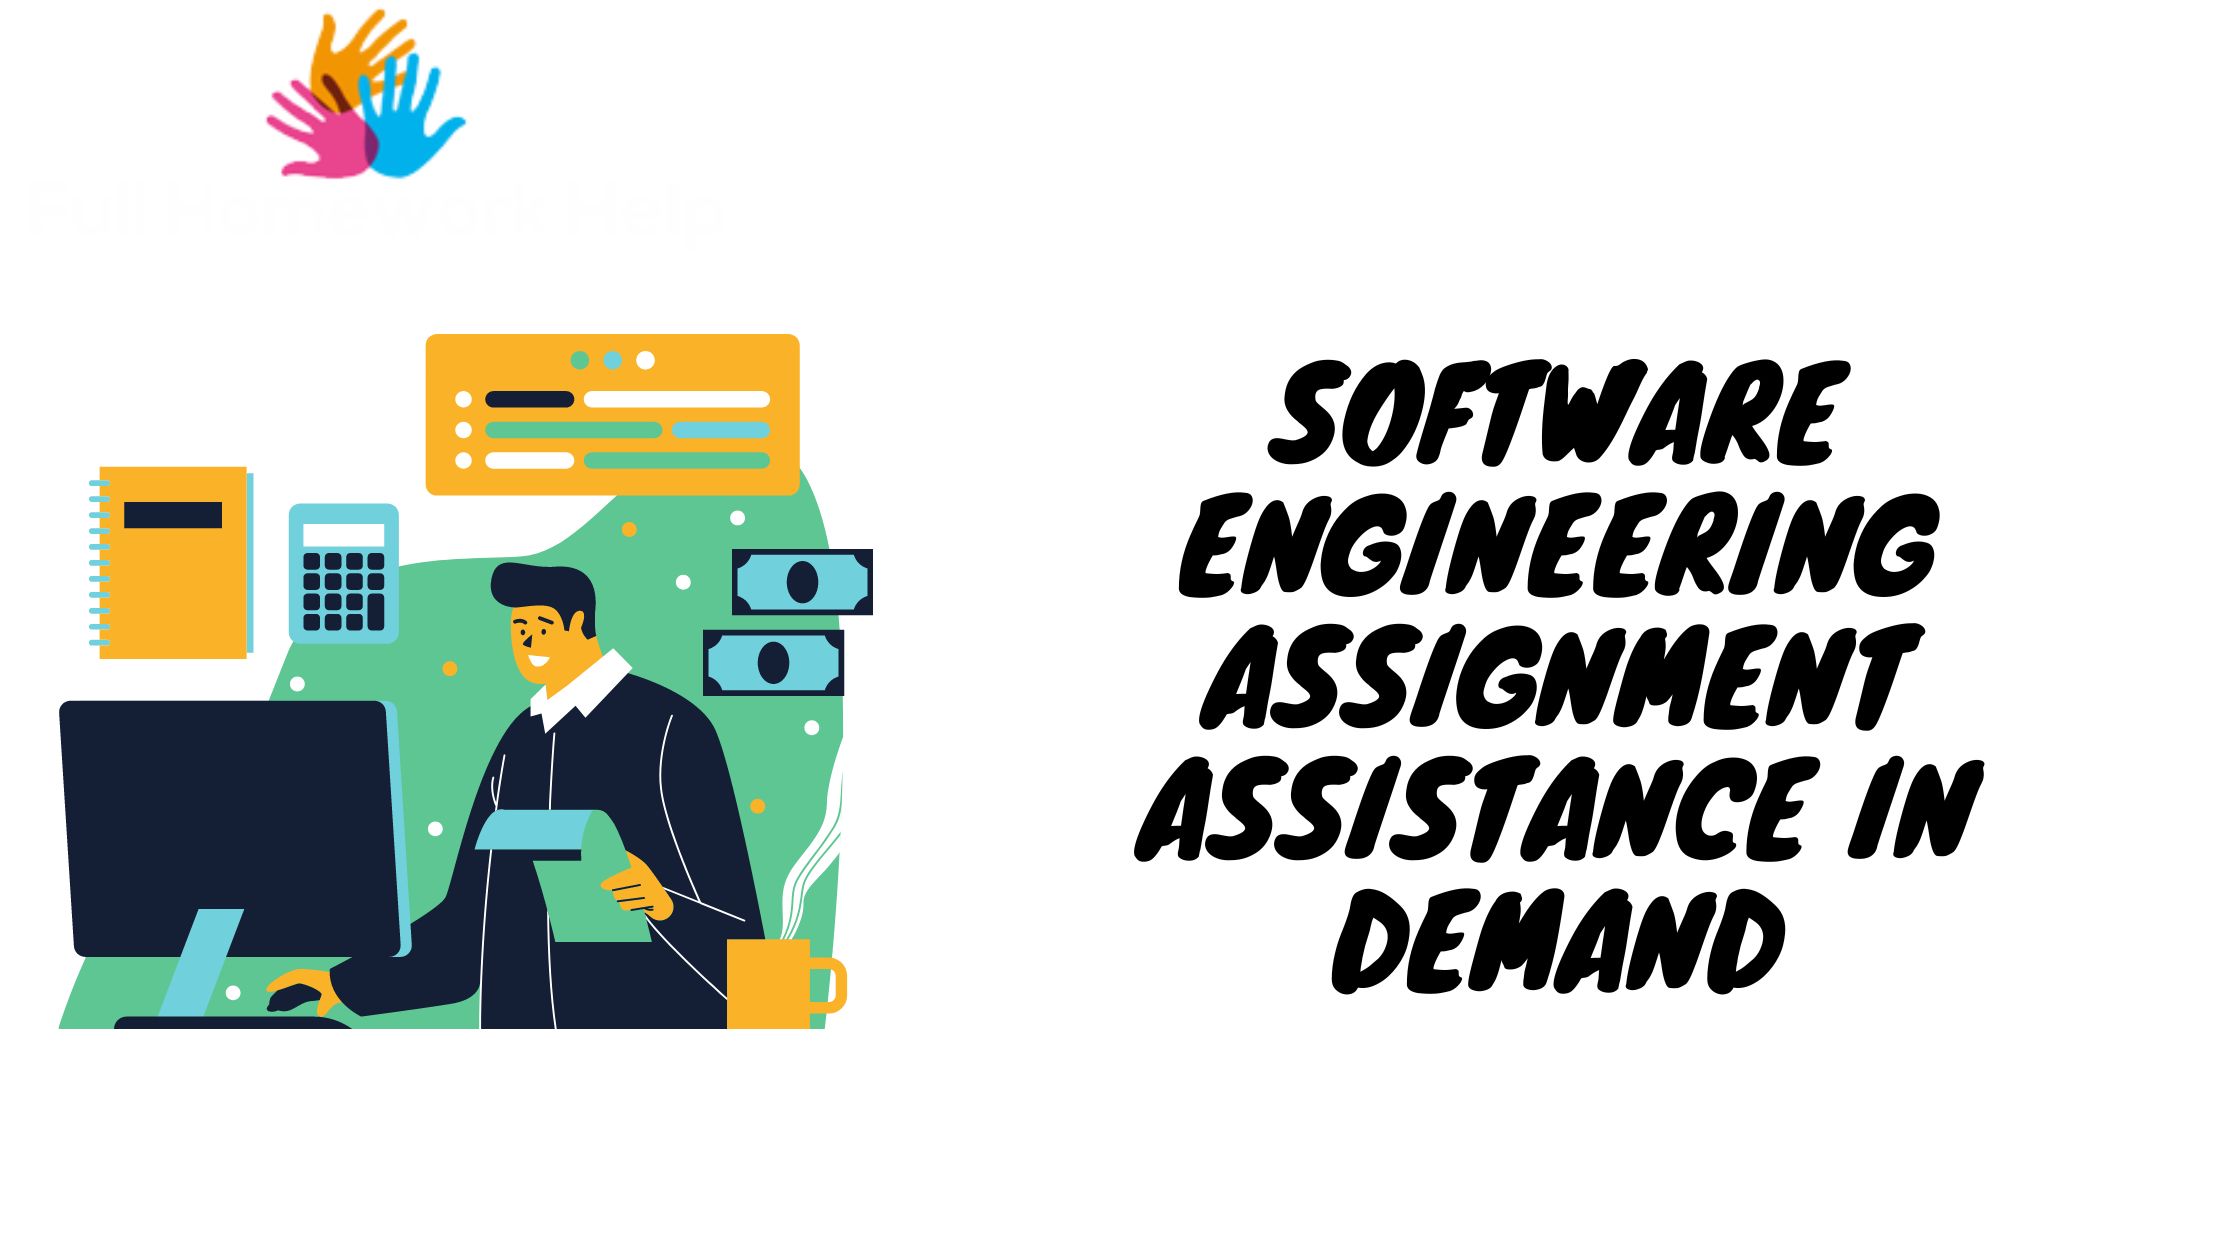 Software Engineering Assignment Assistance in Demand